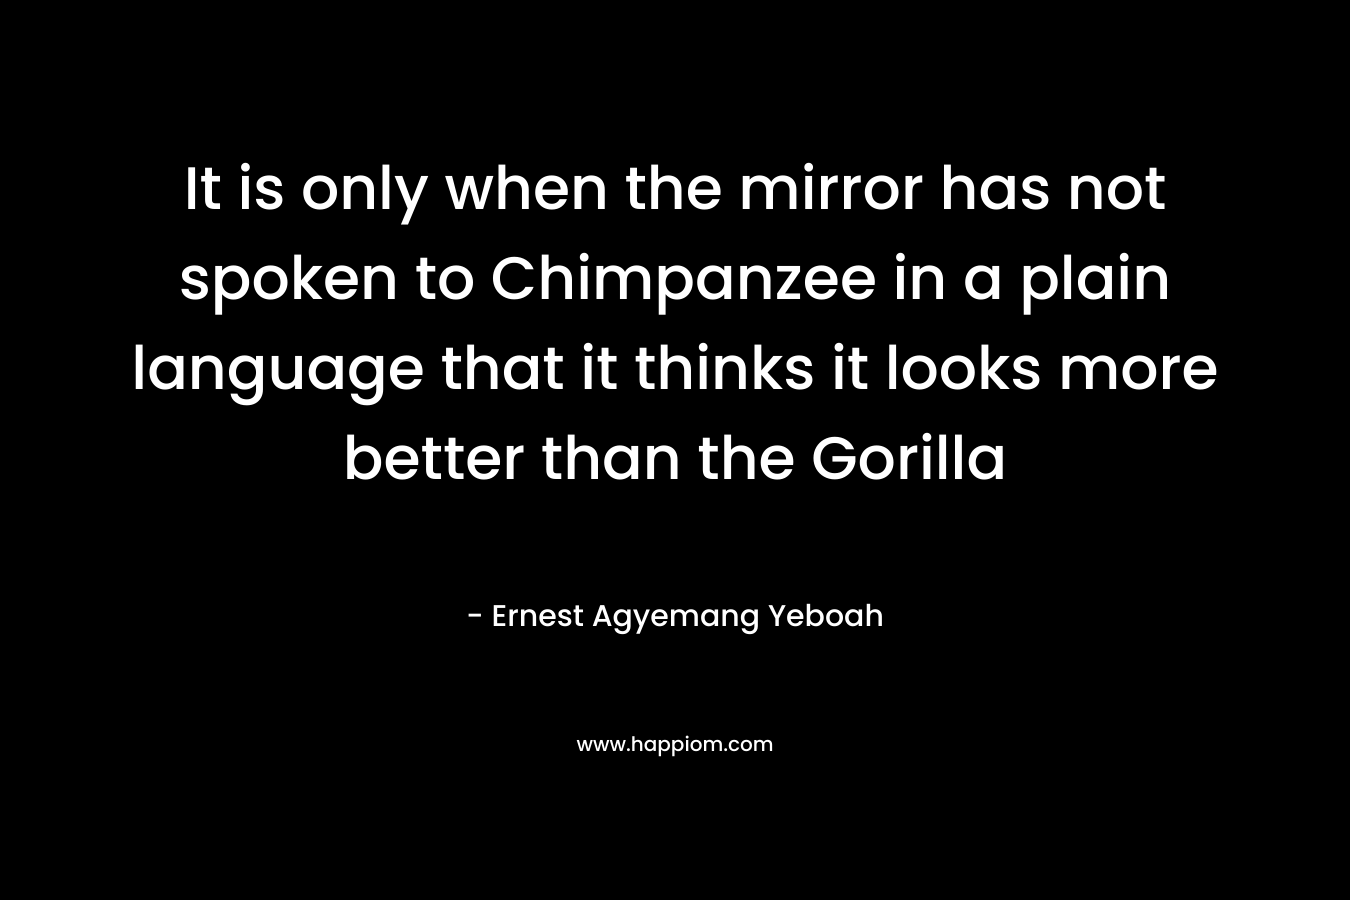 It is only when the mirror has not spoken to Chimpanzee in a plain language that it thinks it looks more better than the Gorilla